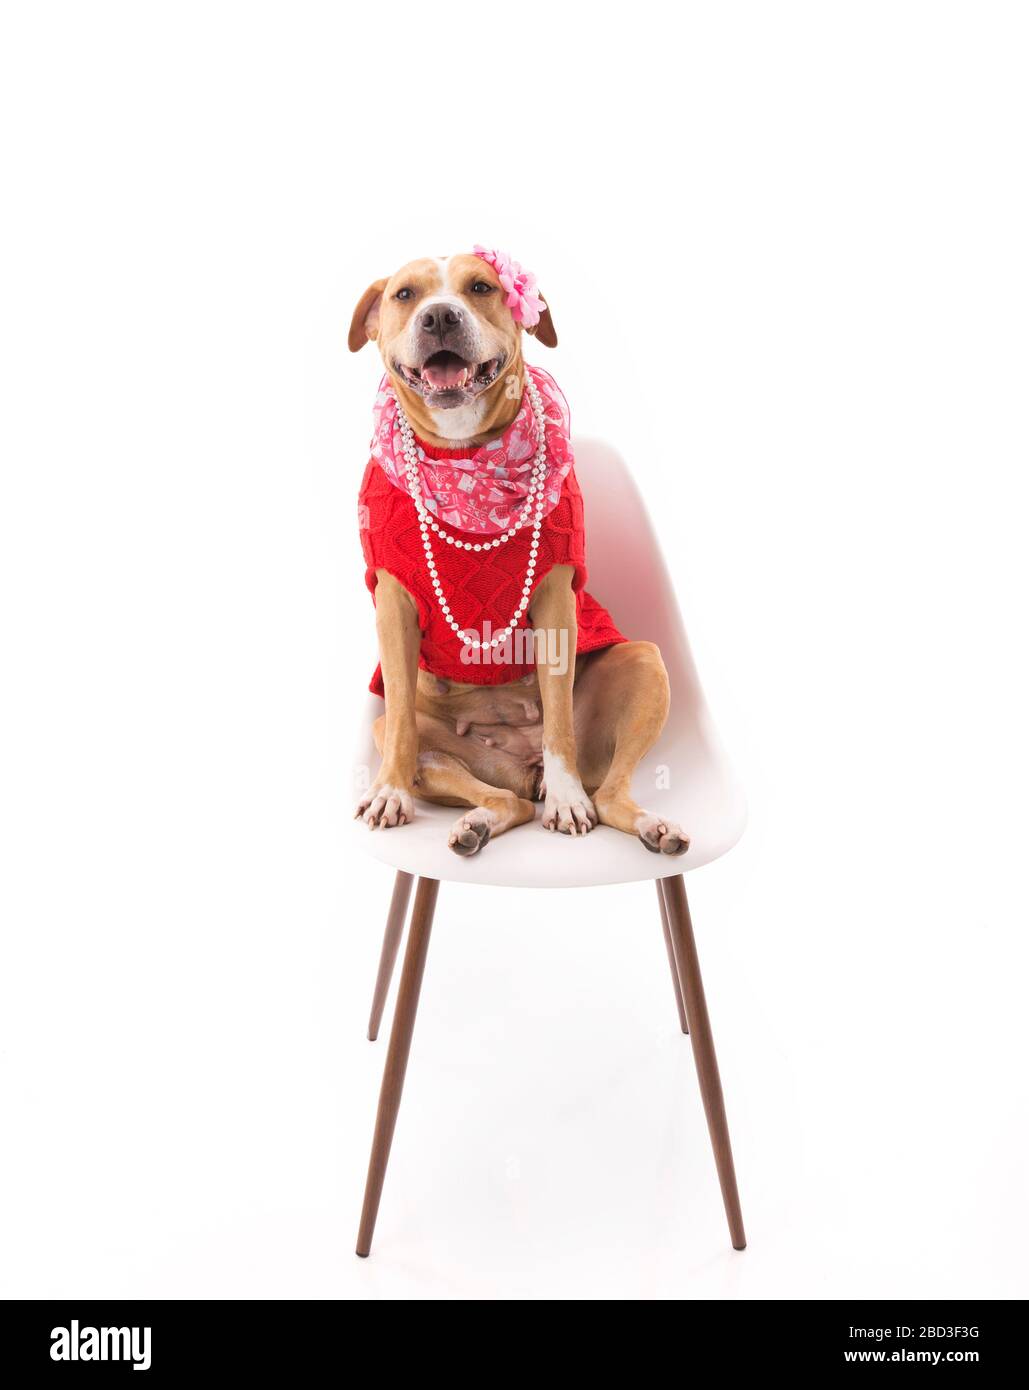 Red and white Staffordshire terrier wearing clothes on high key Stock Photo